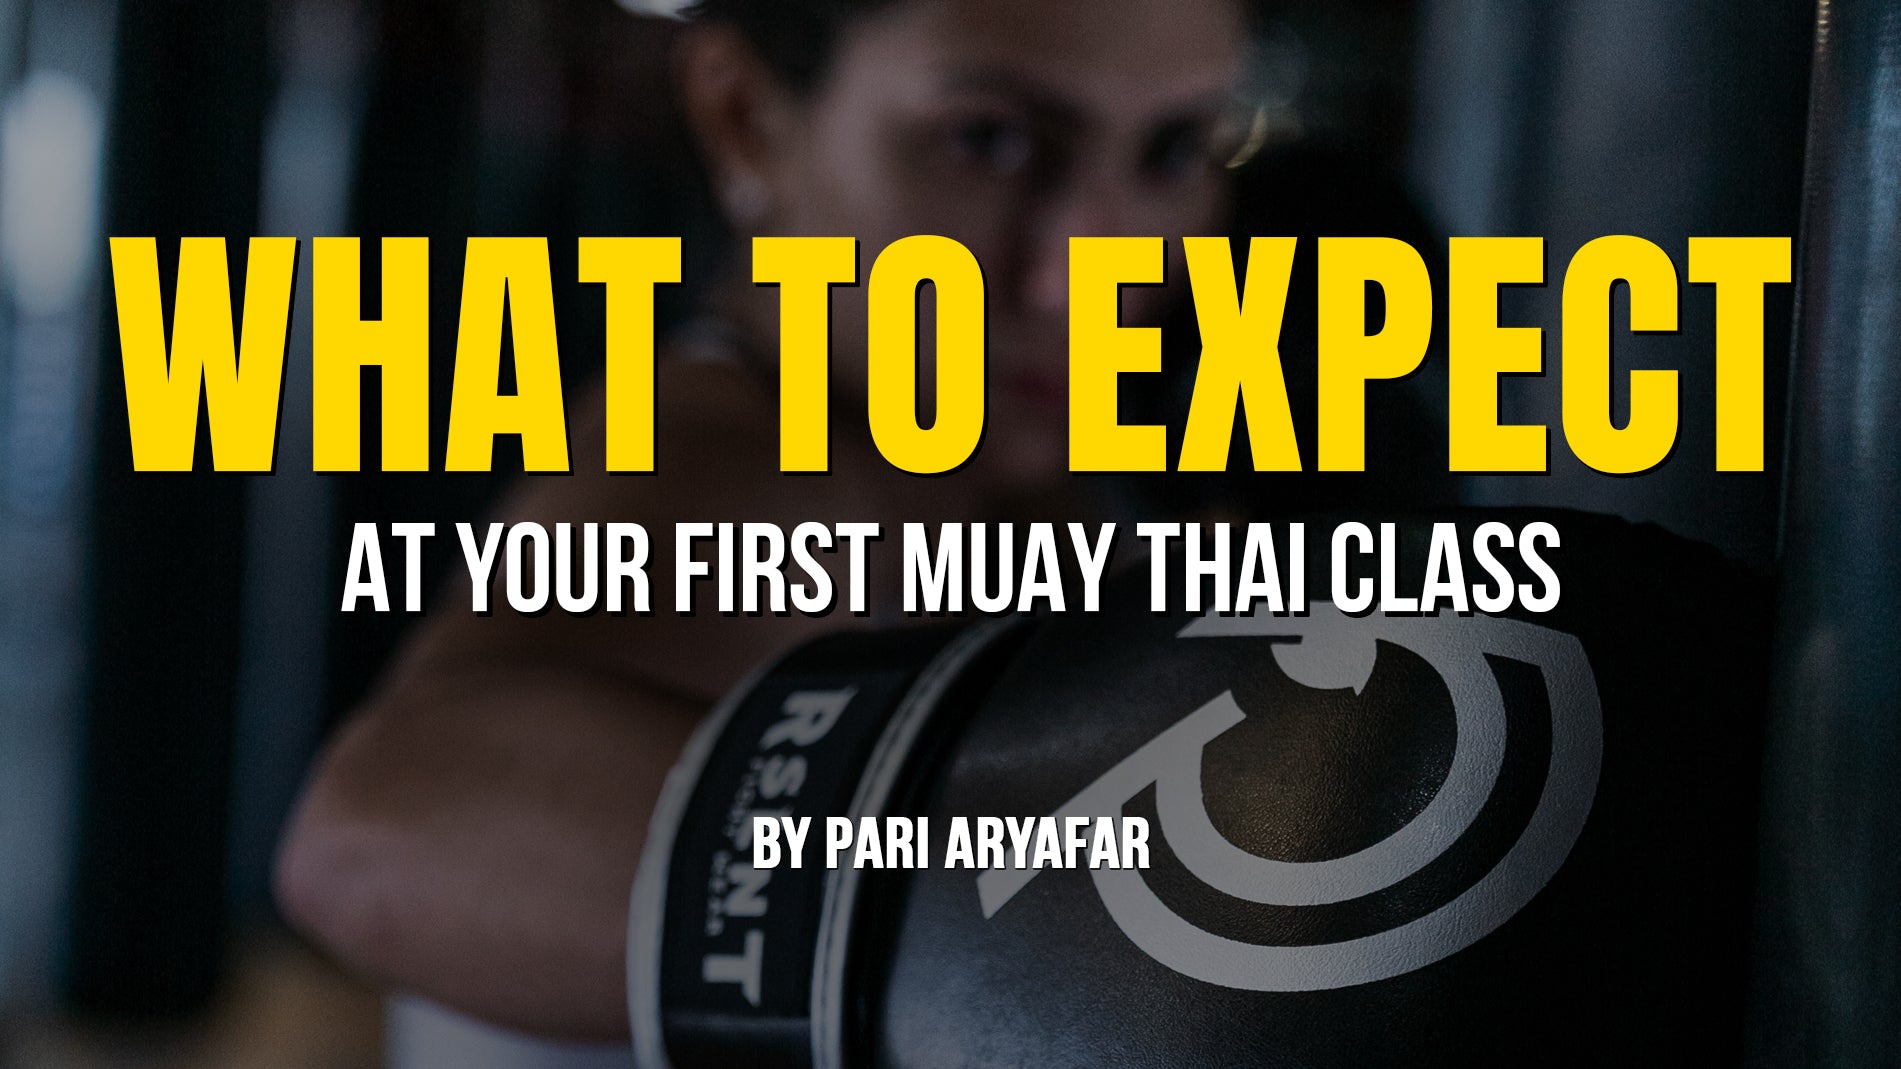 What To Expect At Your First Muay Thai Class